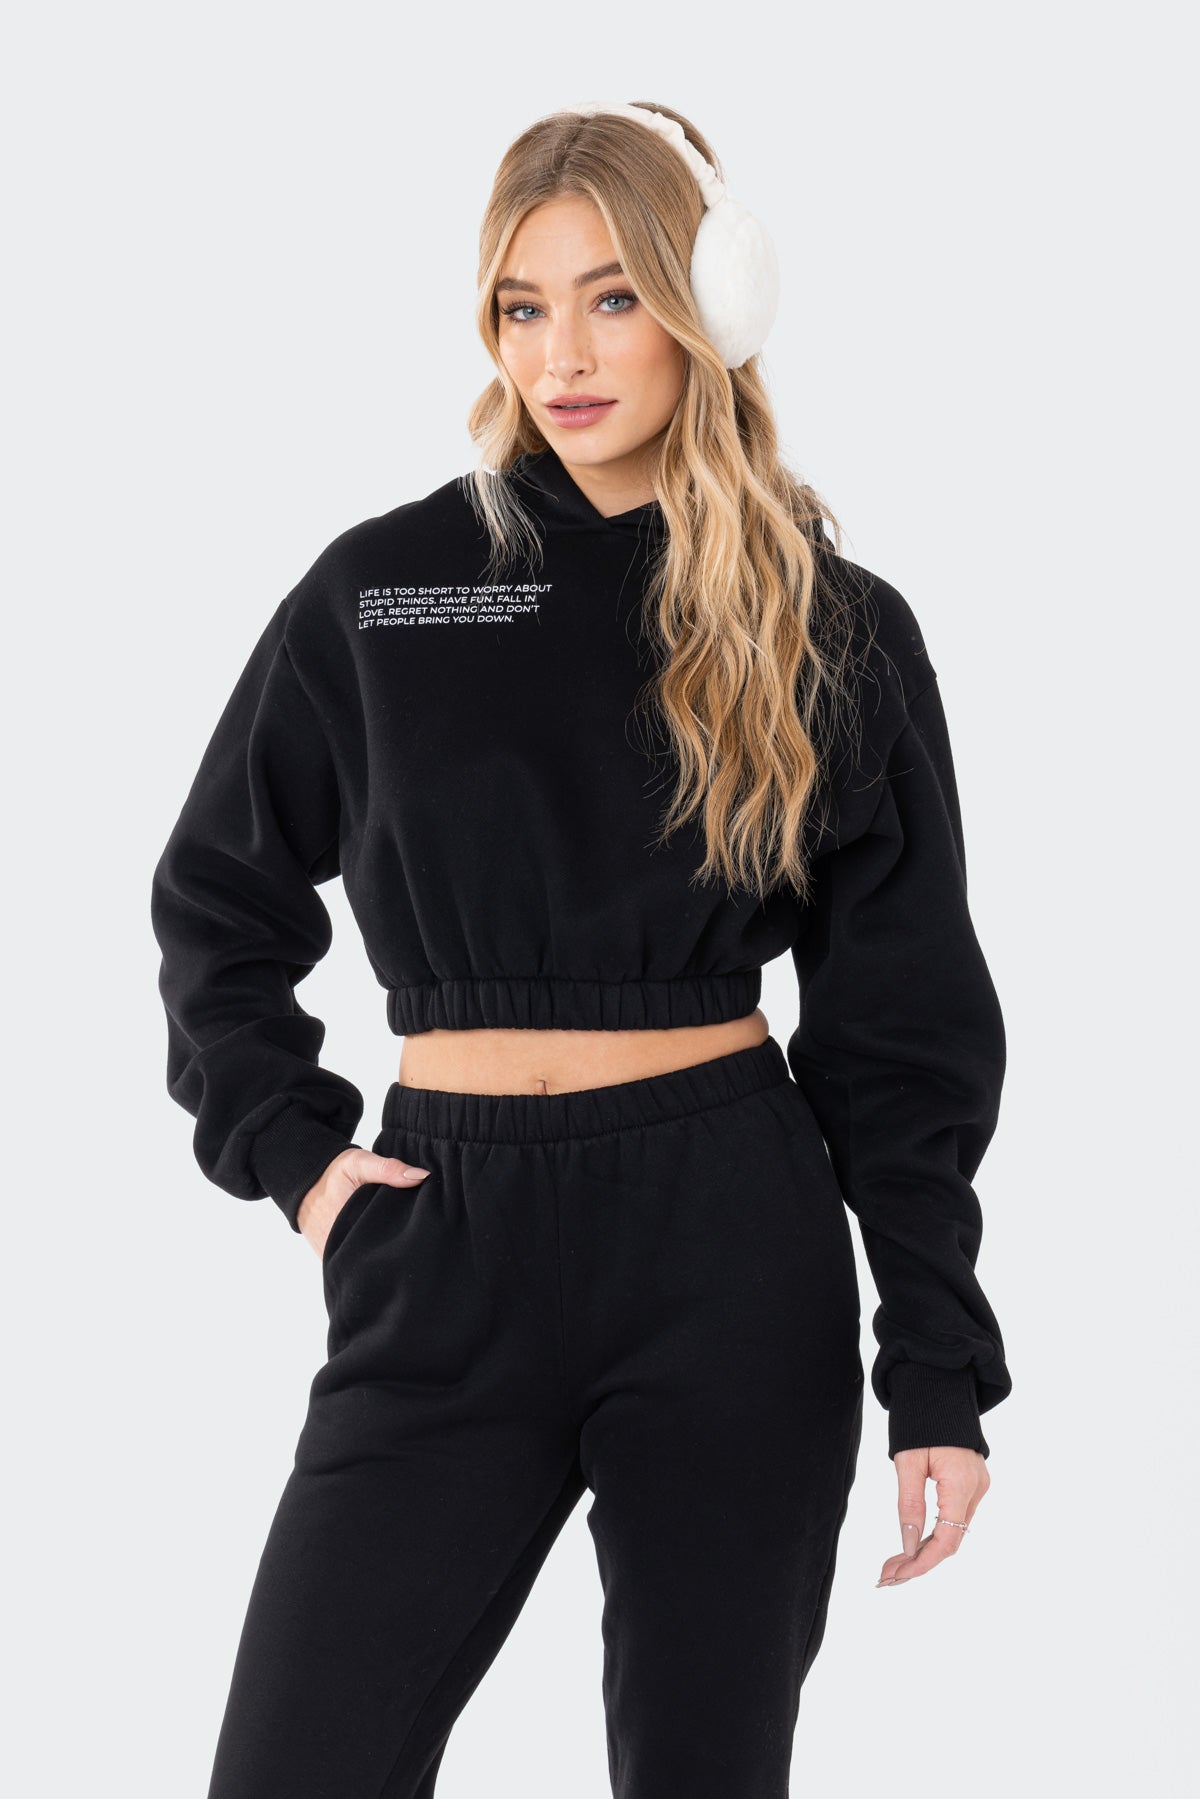 Life's Too Short Cropped Hoodie